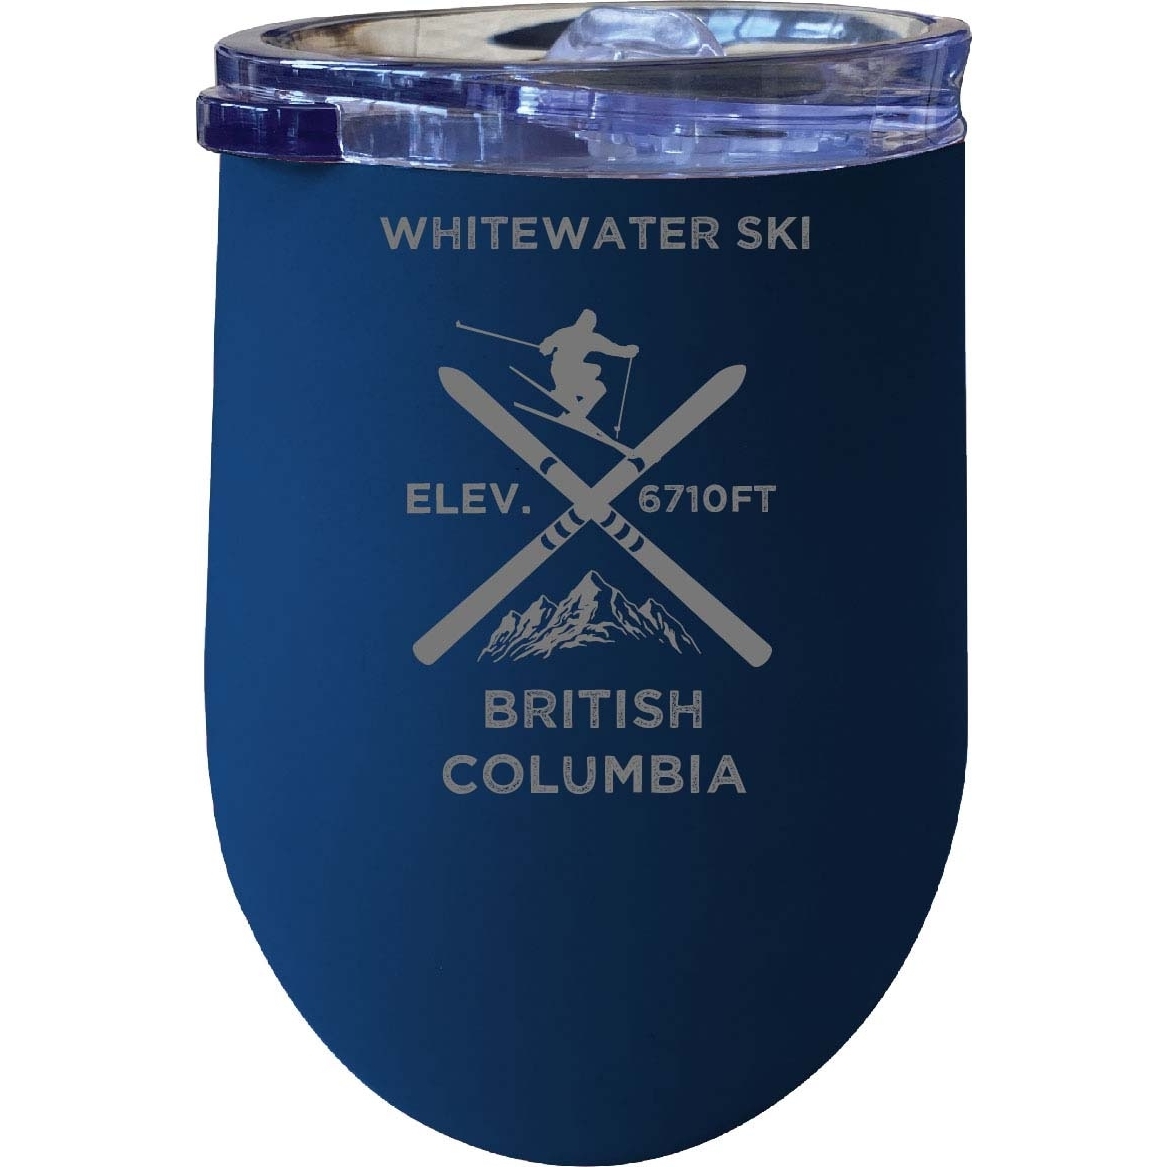 Whitewater Ski British Columbia Ski Souvenir 12 Oz Laser Etched Insulated Wine Stainless Steel Tumbler - Rose Gold